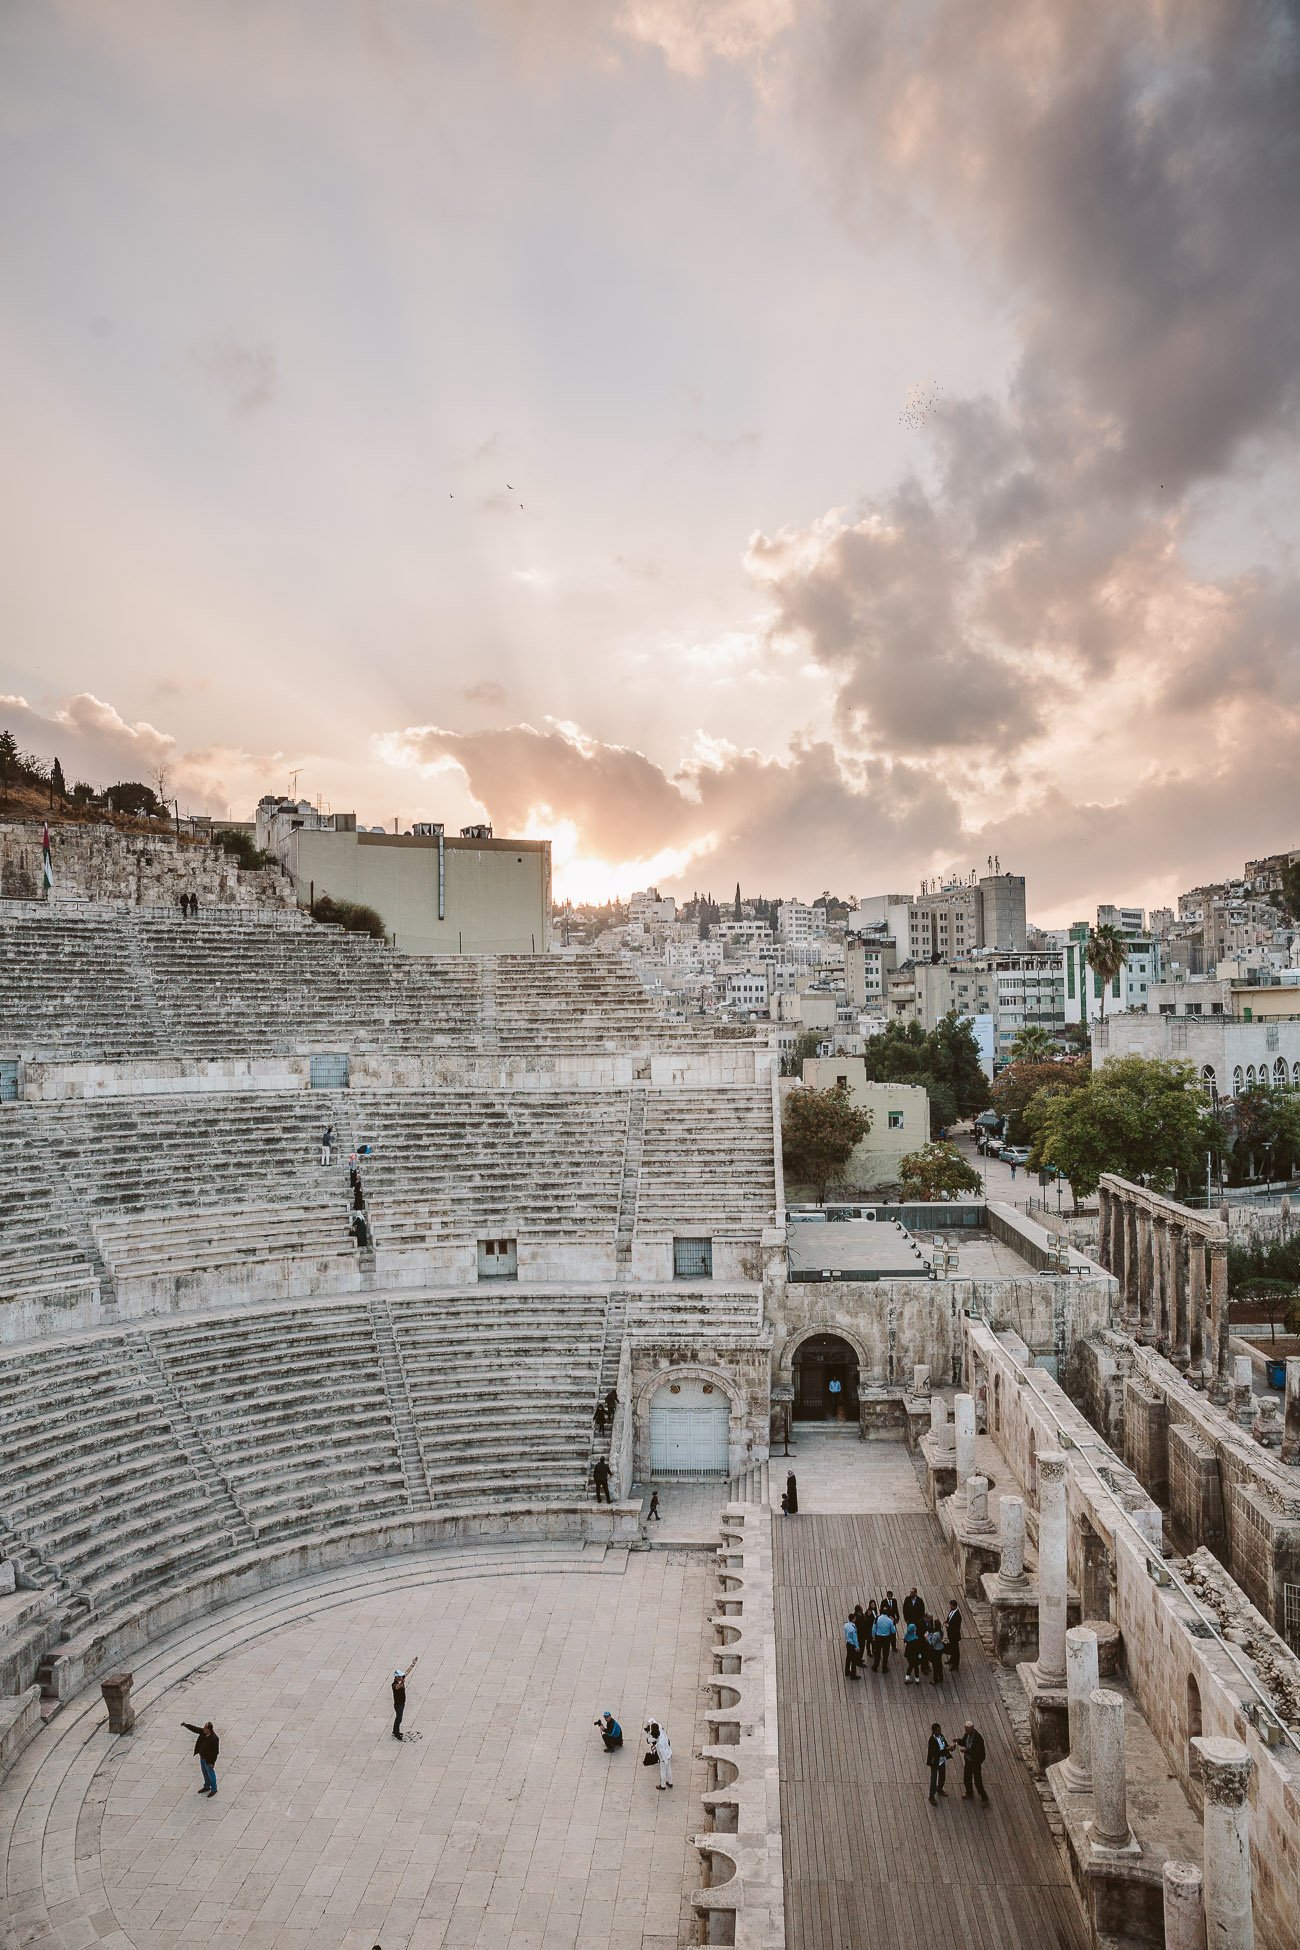 Watch the sunset at the Roman Theatre in Amman during 24 hours in Amman